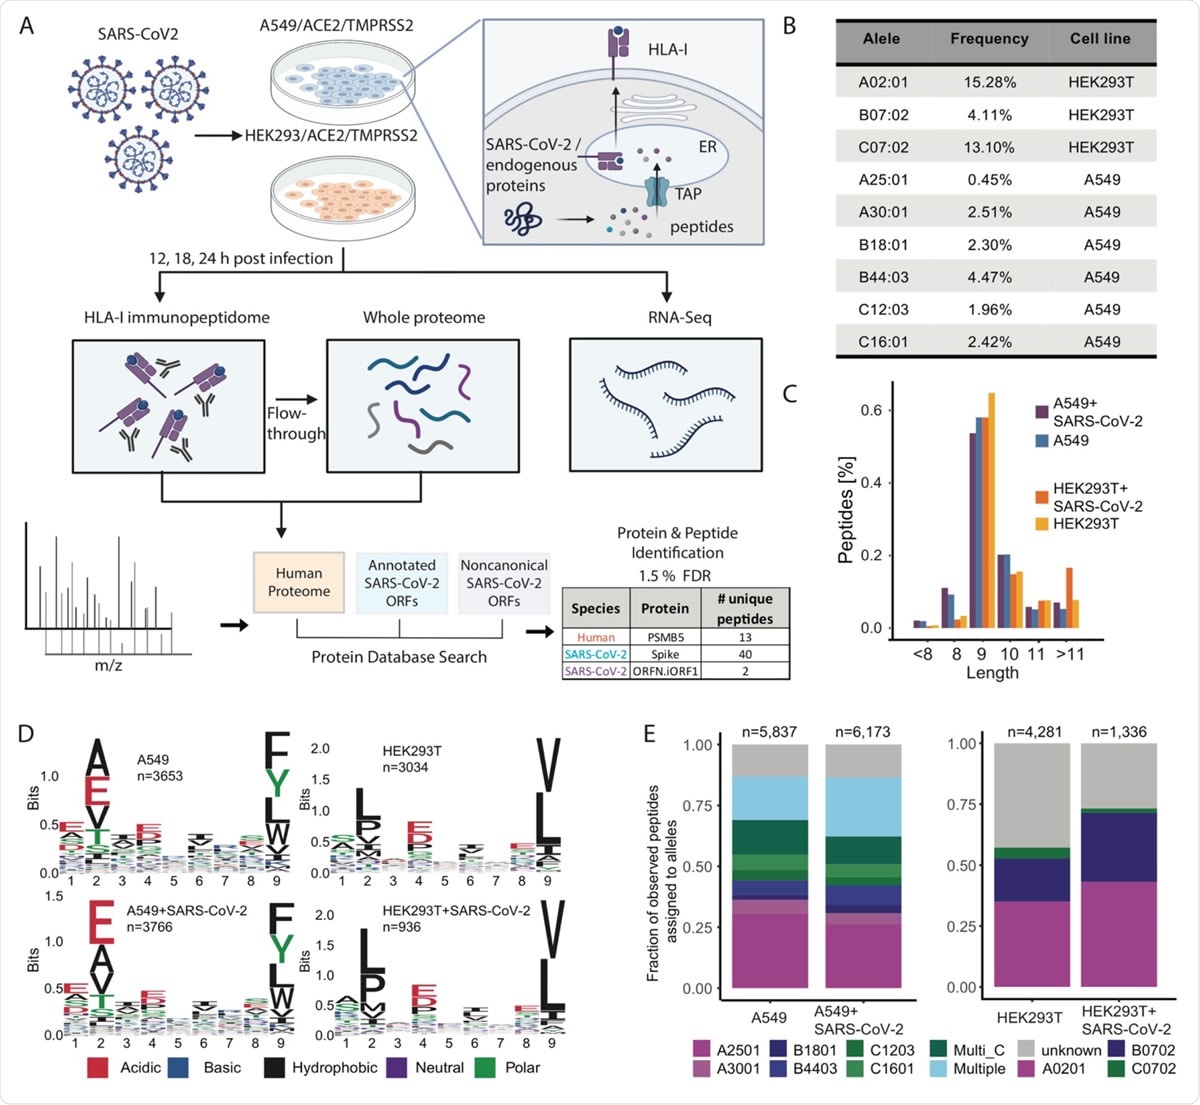 Experimental design and measurements of HLA-I immunopeptidome, whole proteome and RNA-seq in SARS-CoV-2 infected cells.